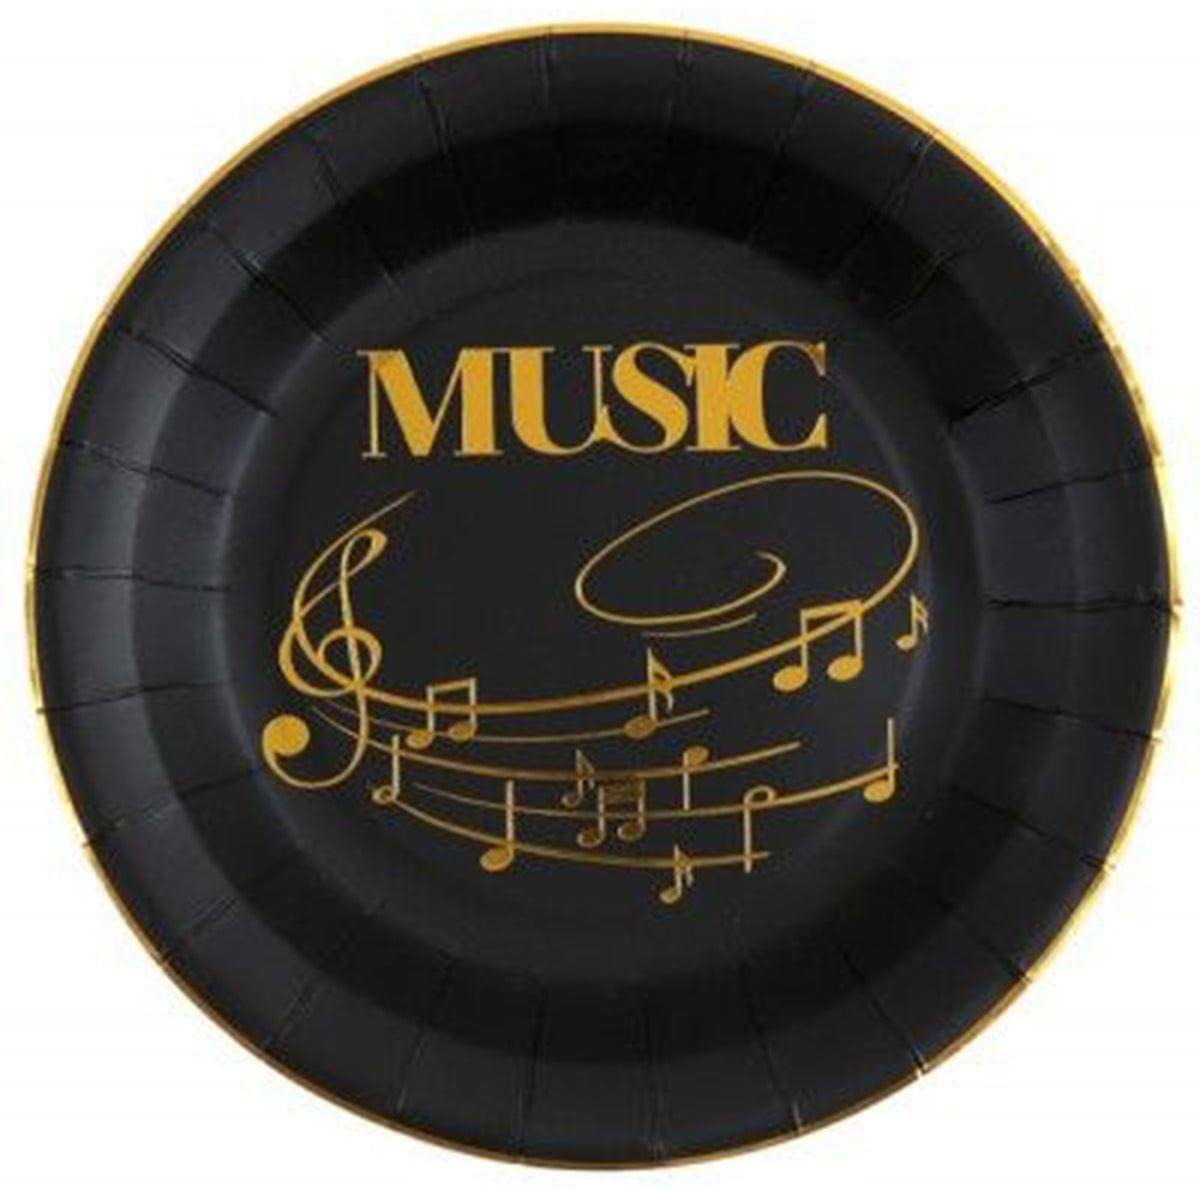 SANTEX Theme Party Award Round Plates, 9 in, 10 Count